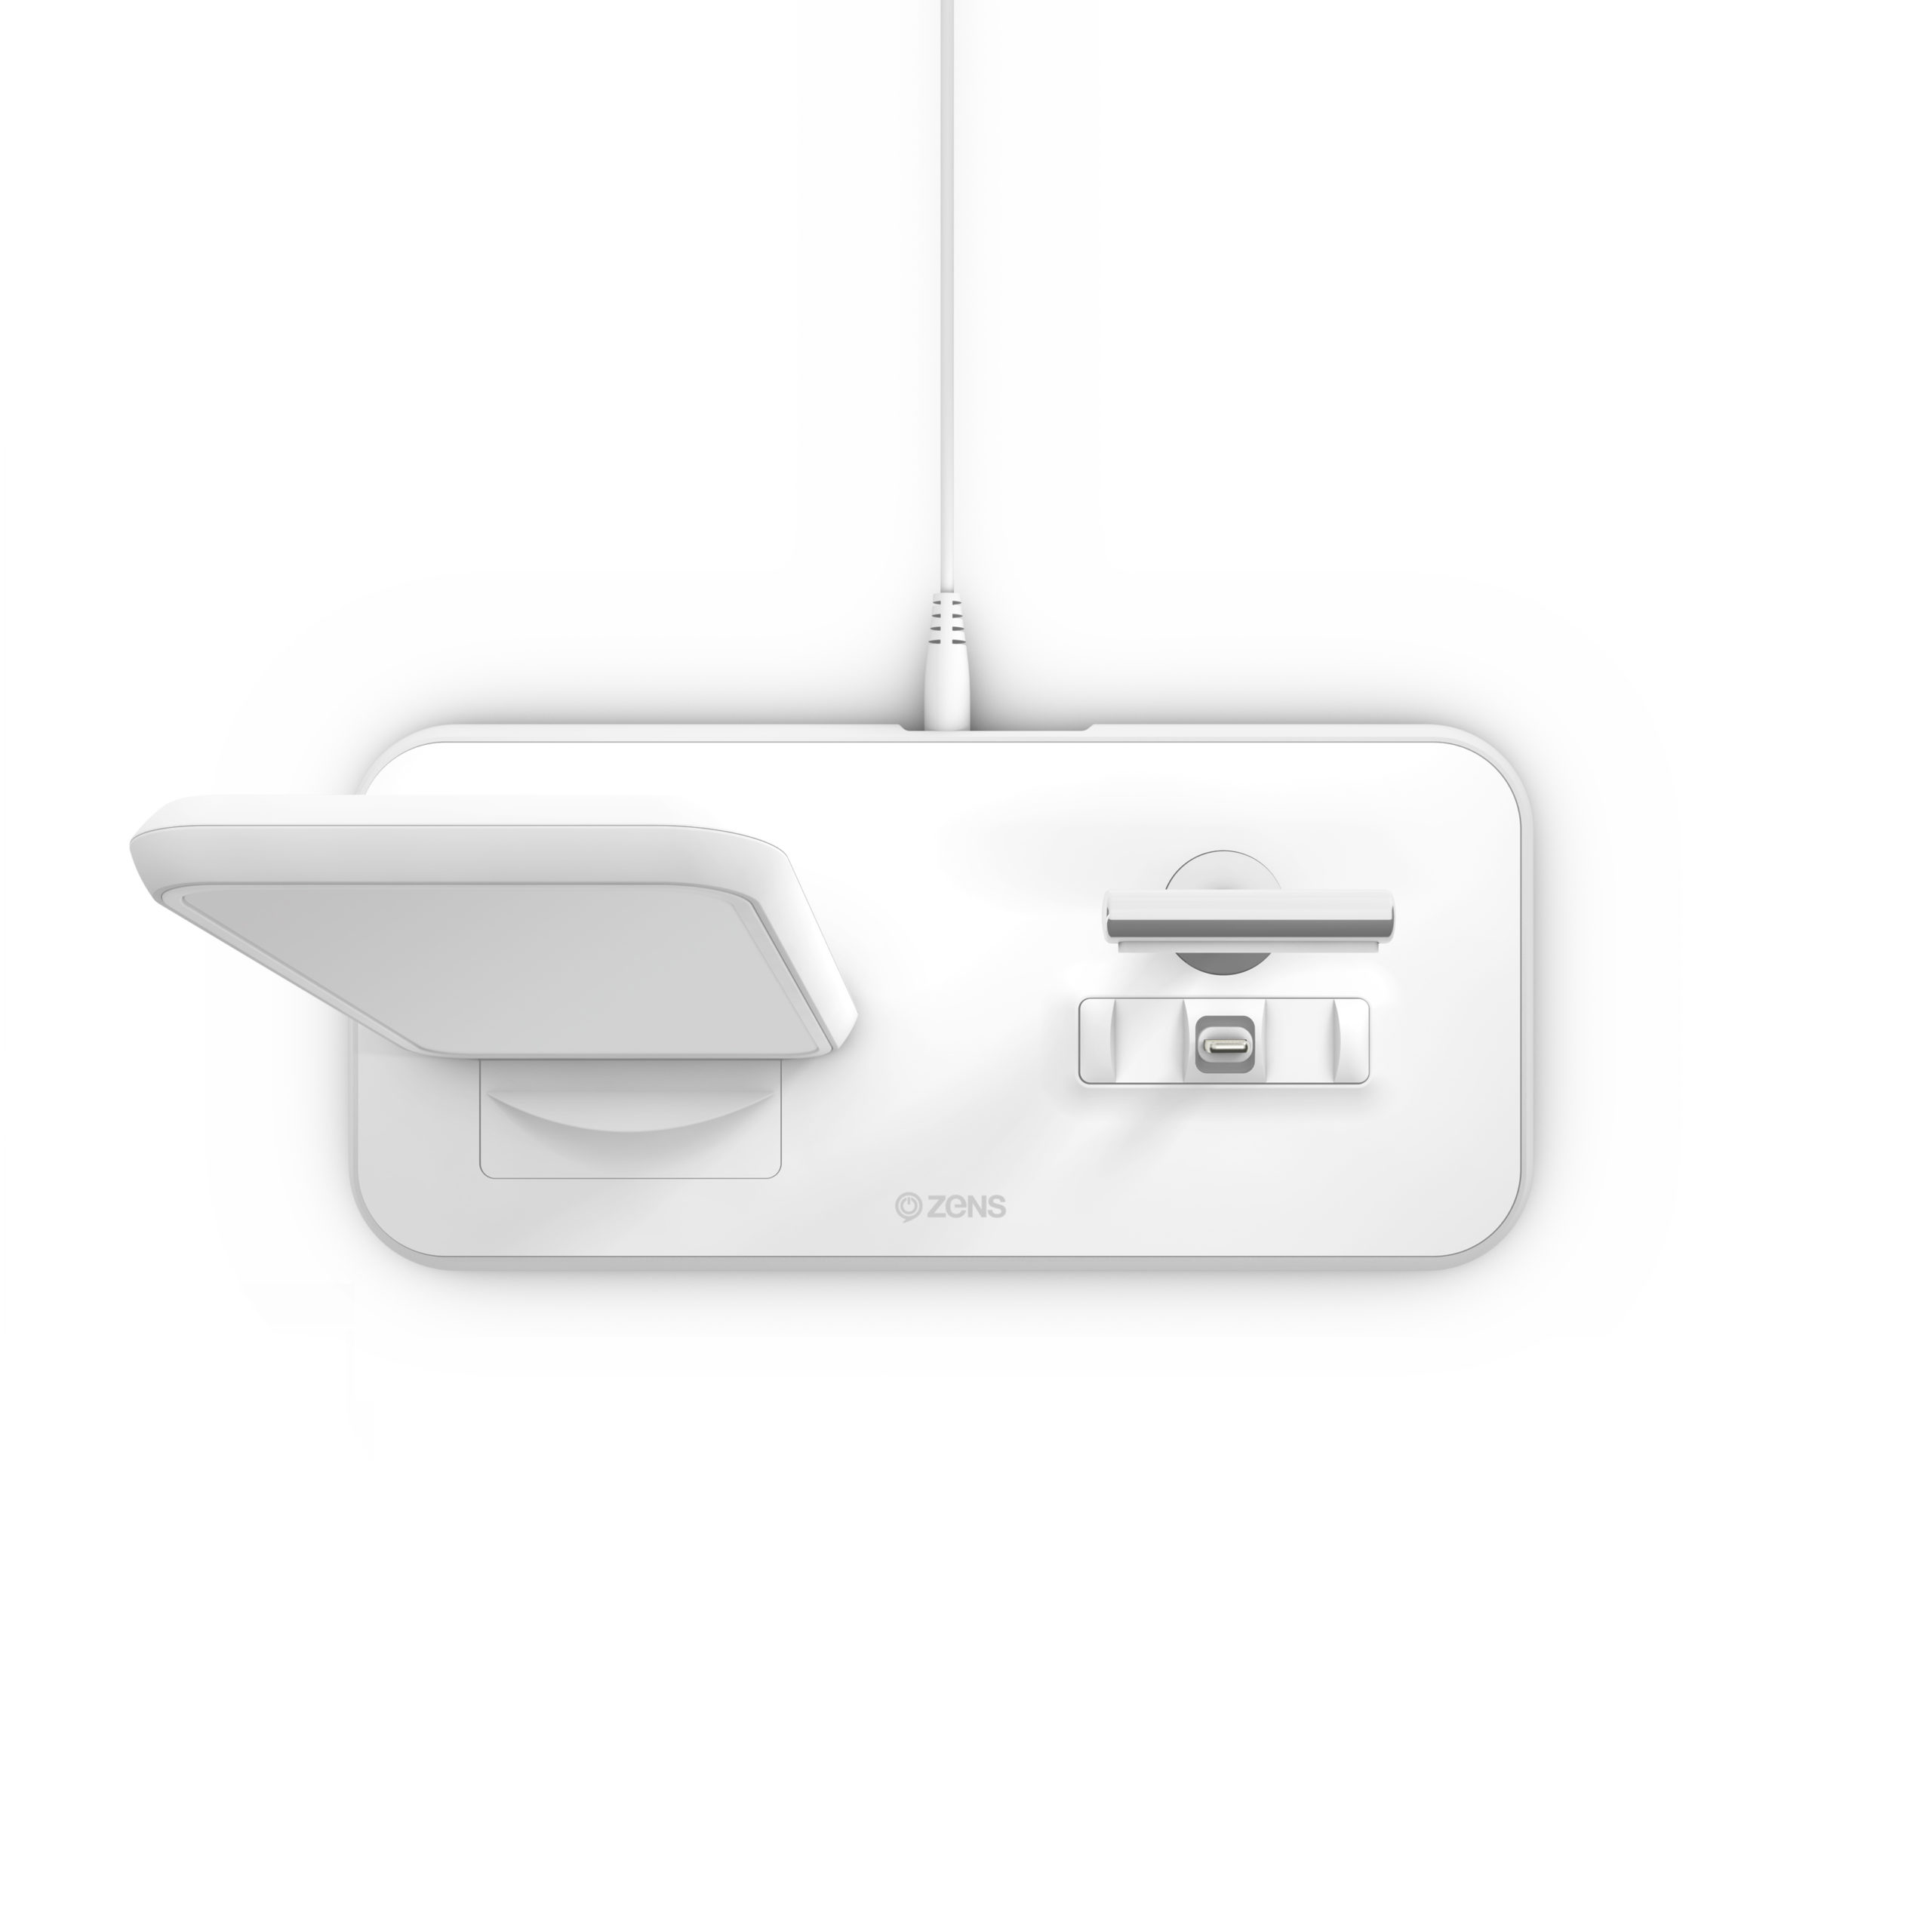 3.-ZENS-StandDock-Aluminium-Wireless-Charger-White-Top-view-scaled